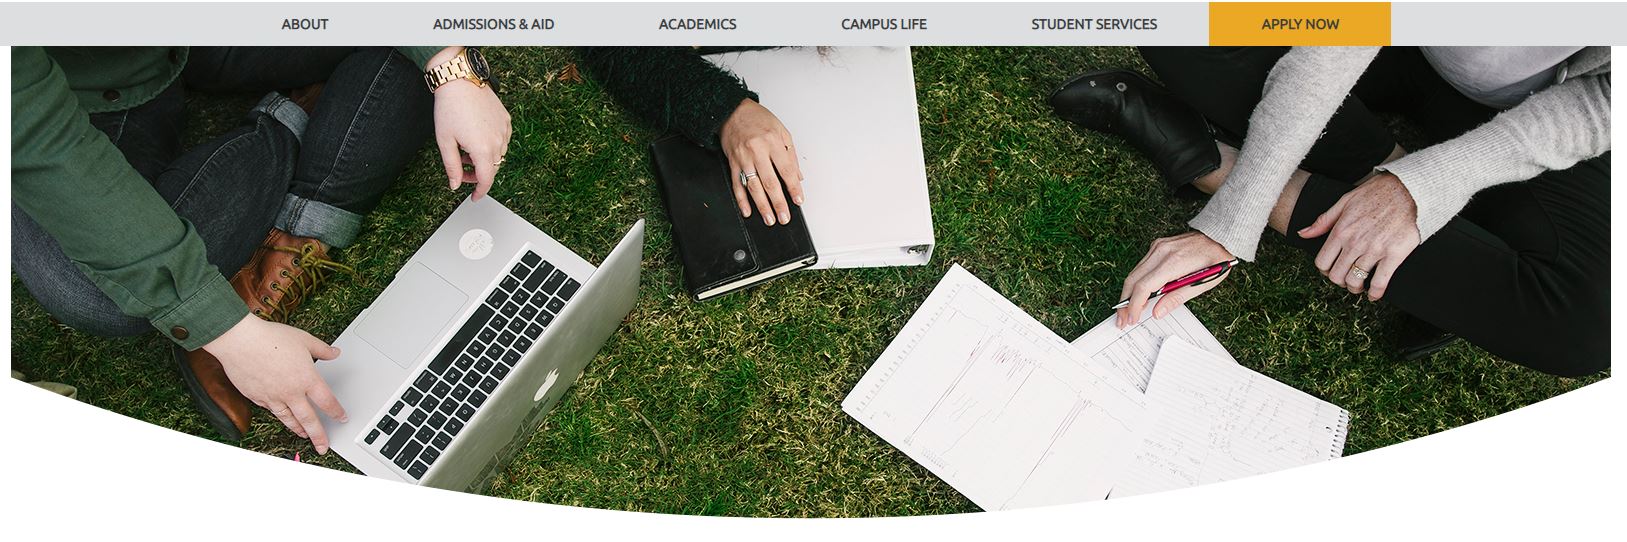 banner image of students on their computers